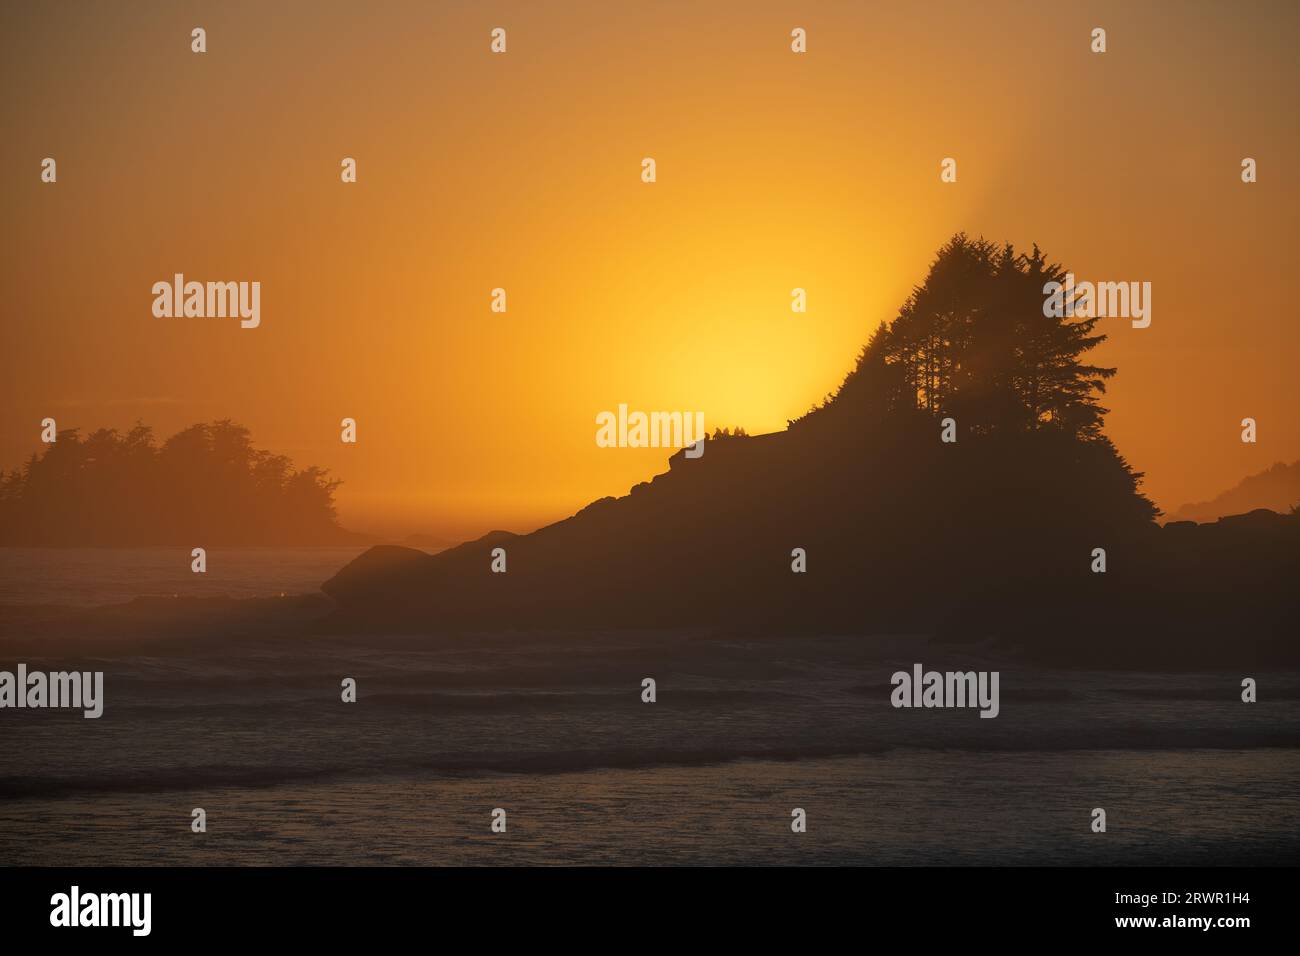 Cox Bay Beach at sunset with people silhouettes on Sunset Point, Tofino, Vancouver Island, British Columbia, Canada. Stock Photo